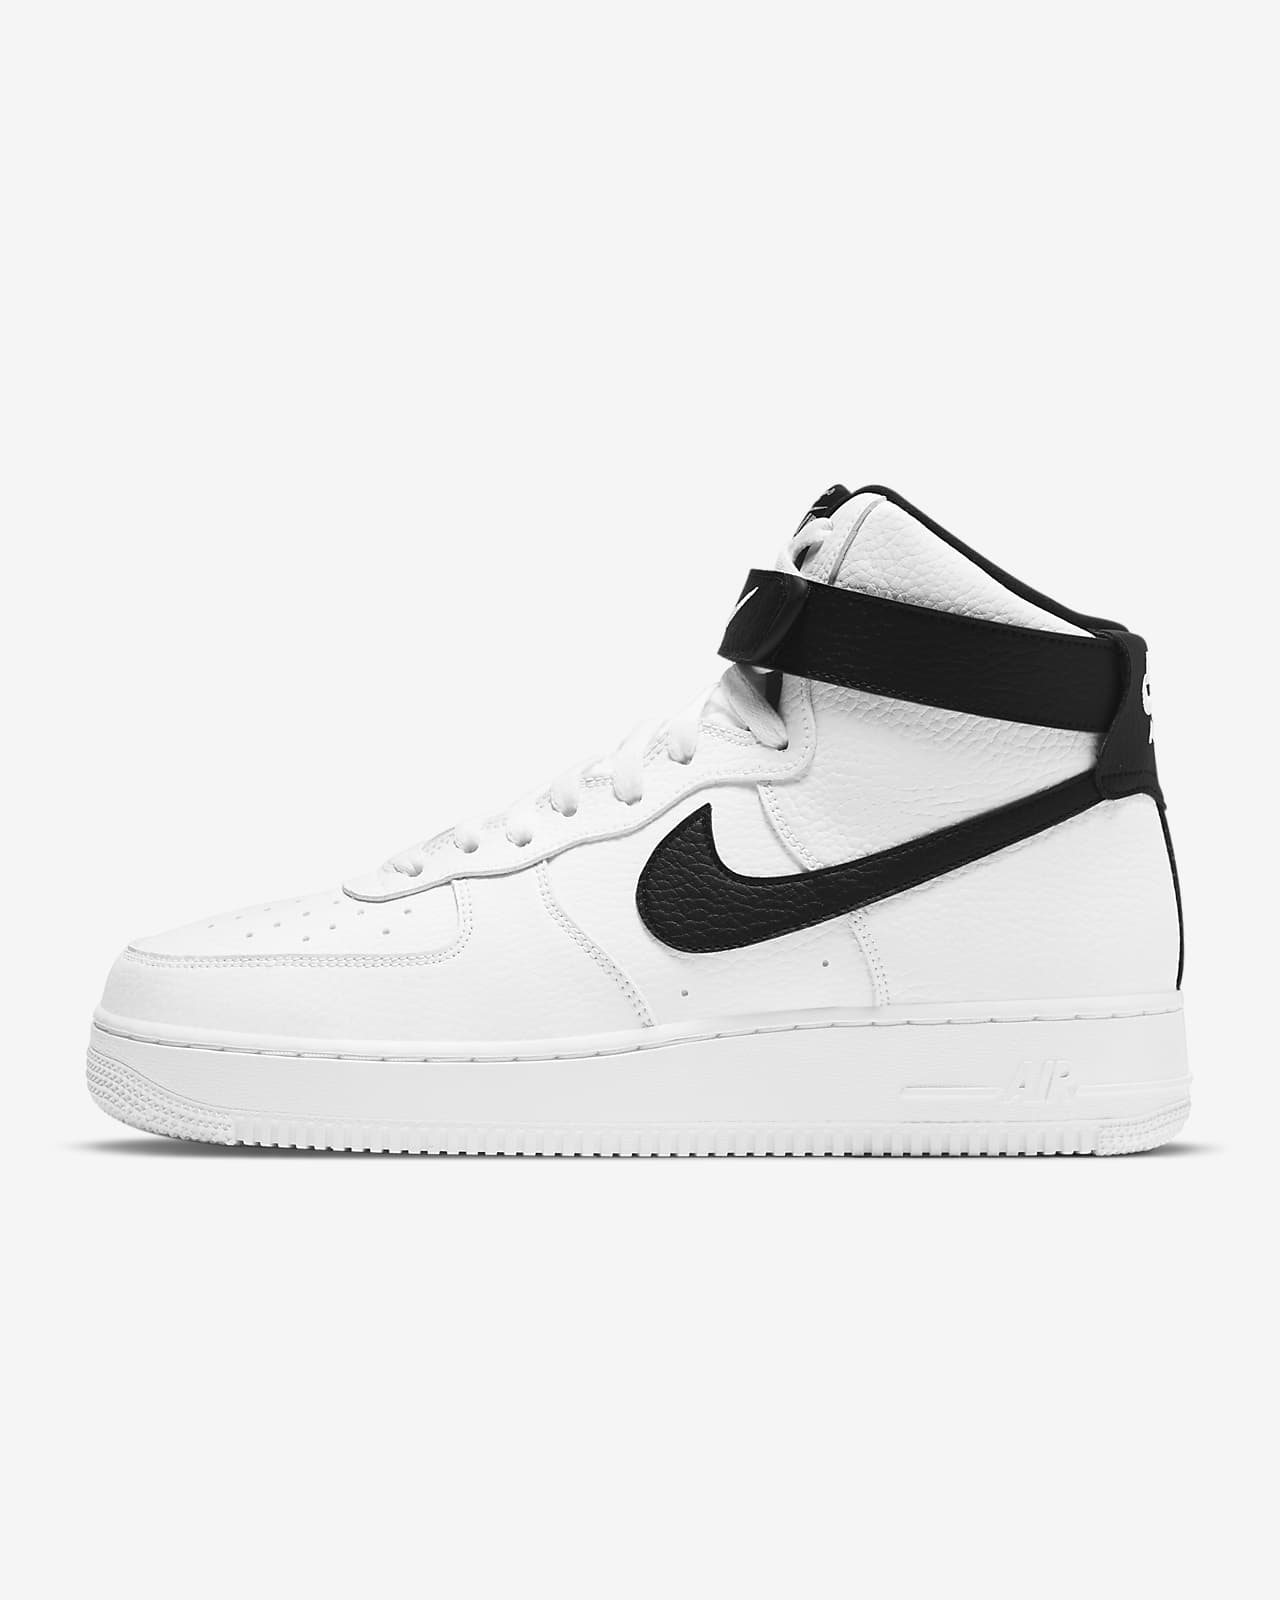 nike air force 1 07 mens black and white